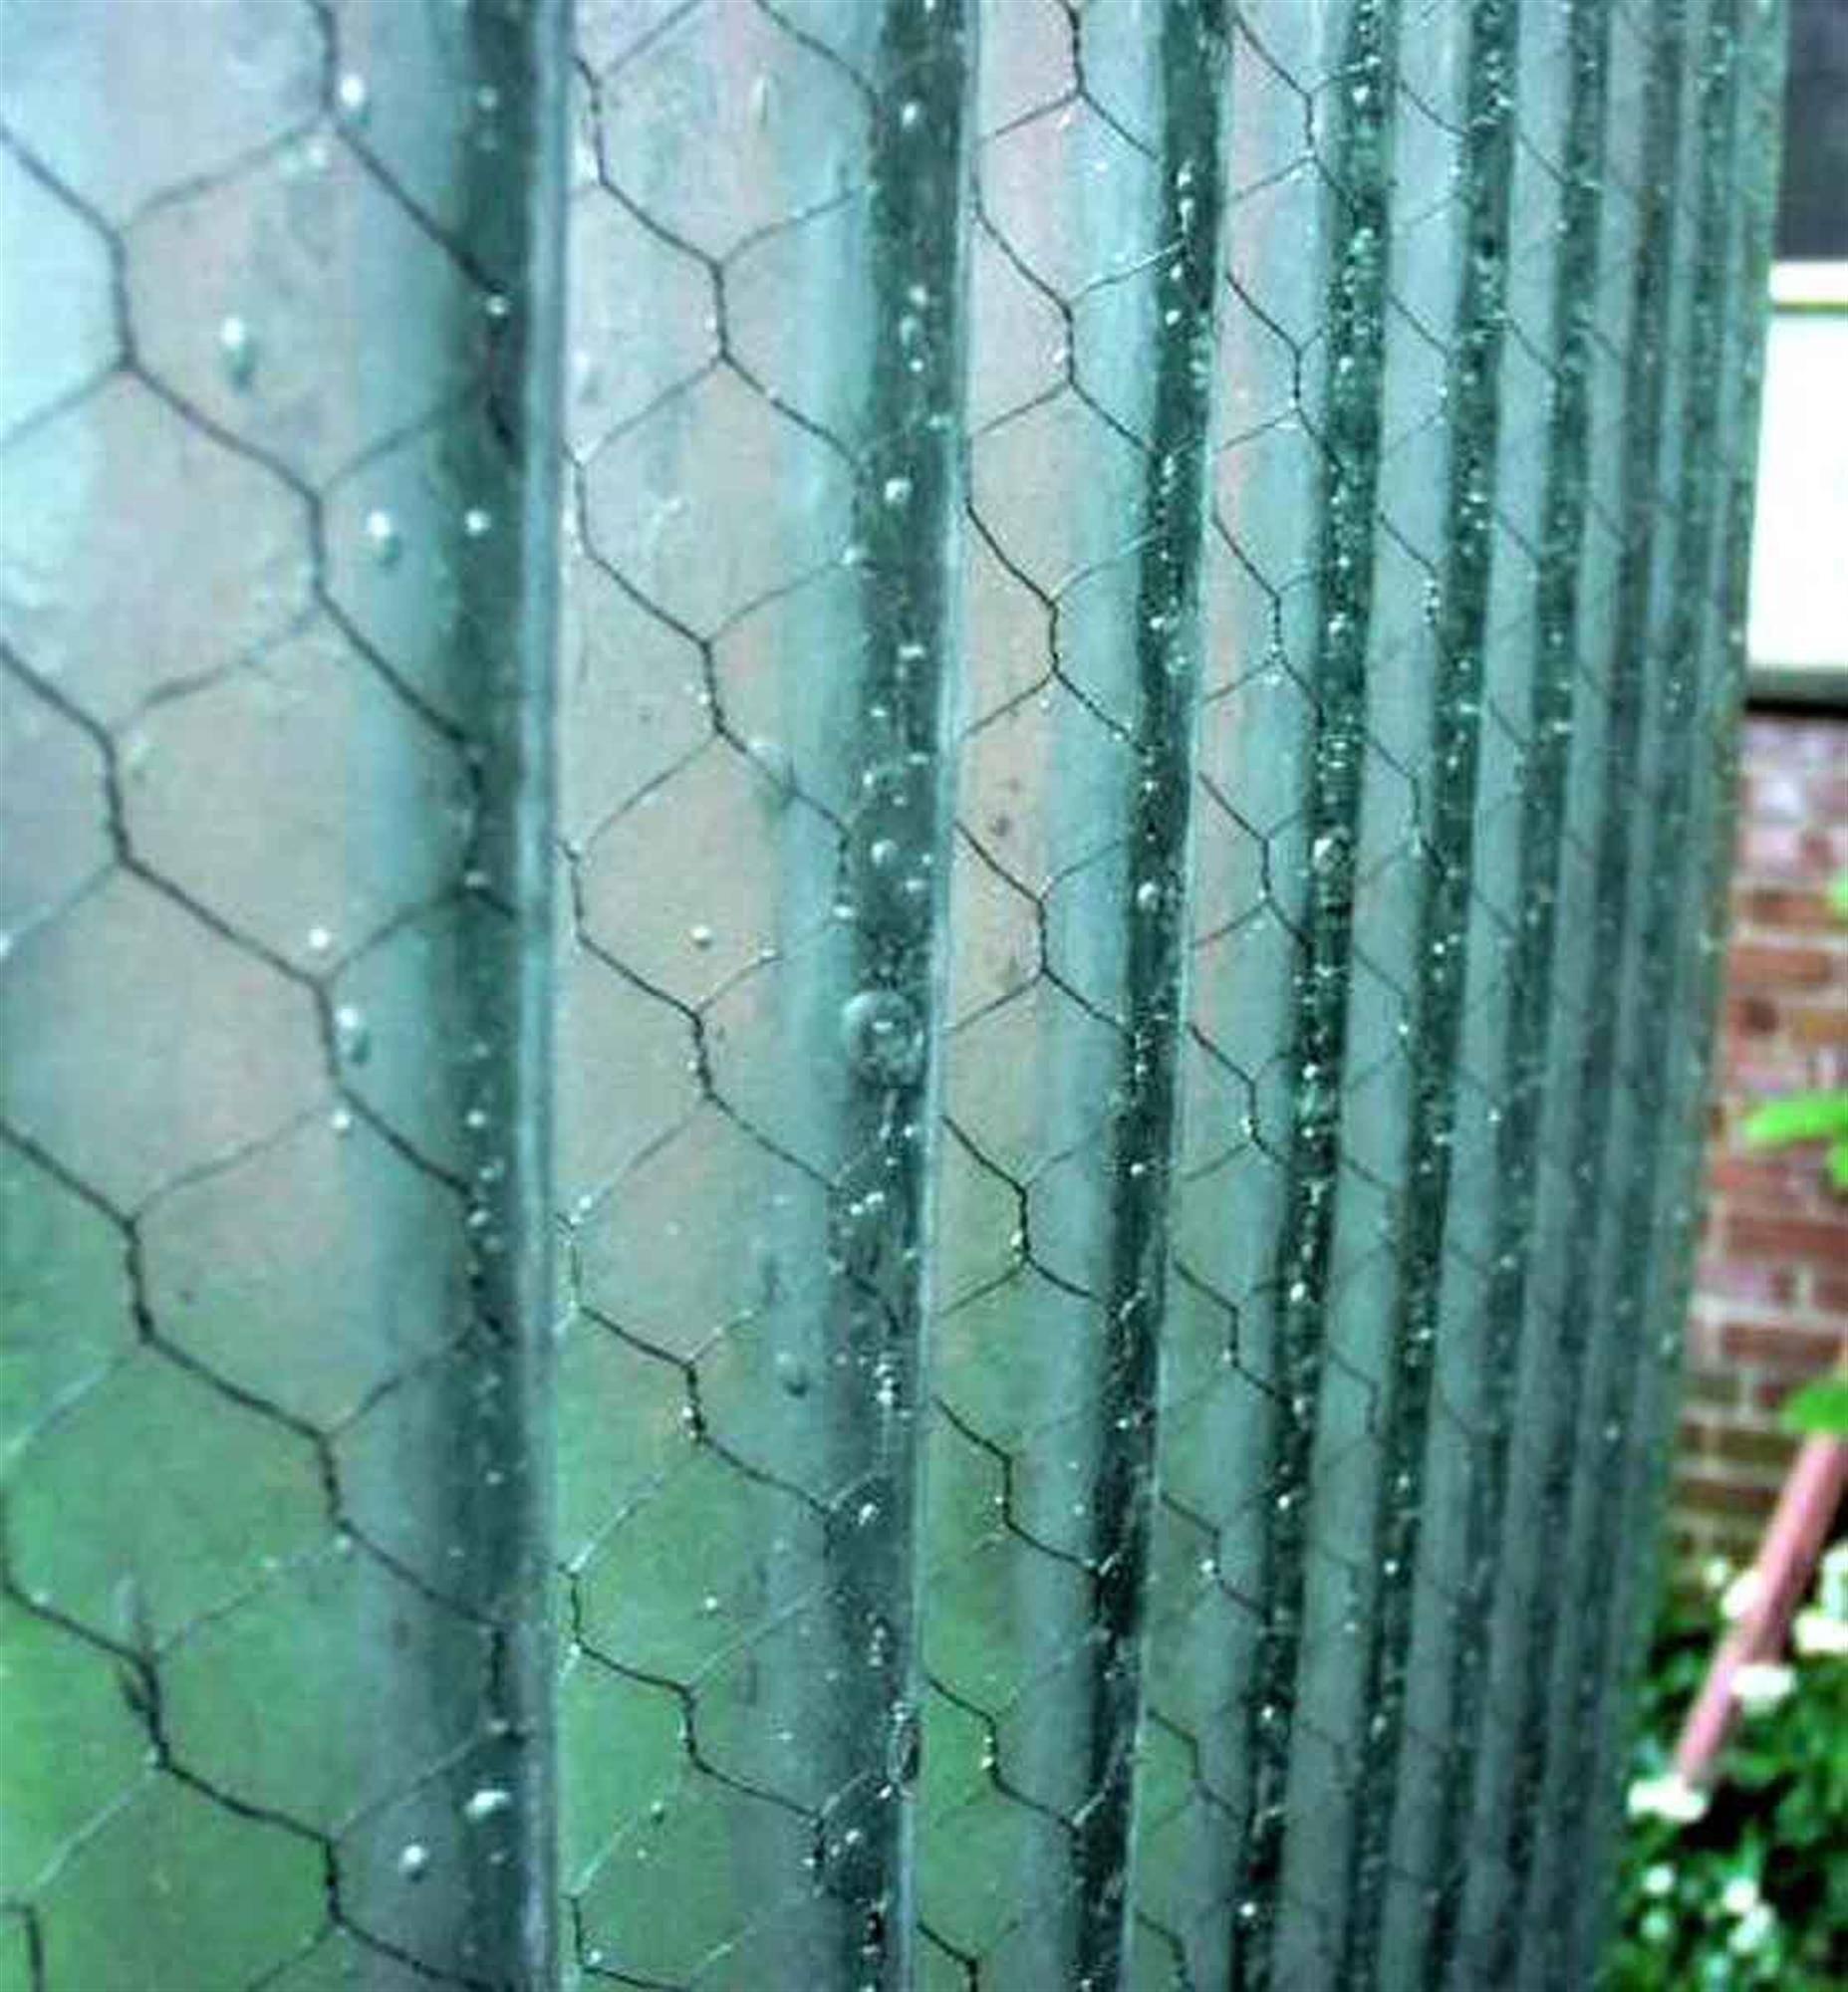 Priced per square foot. 

Reclaimed from old warehouses and industrial buildings, this corrugated industrial glass was used as exterior awnings or partitions indoors and out. This glass is 3/8 to 7/16 in. thick and comes in a width of approximately